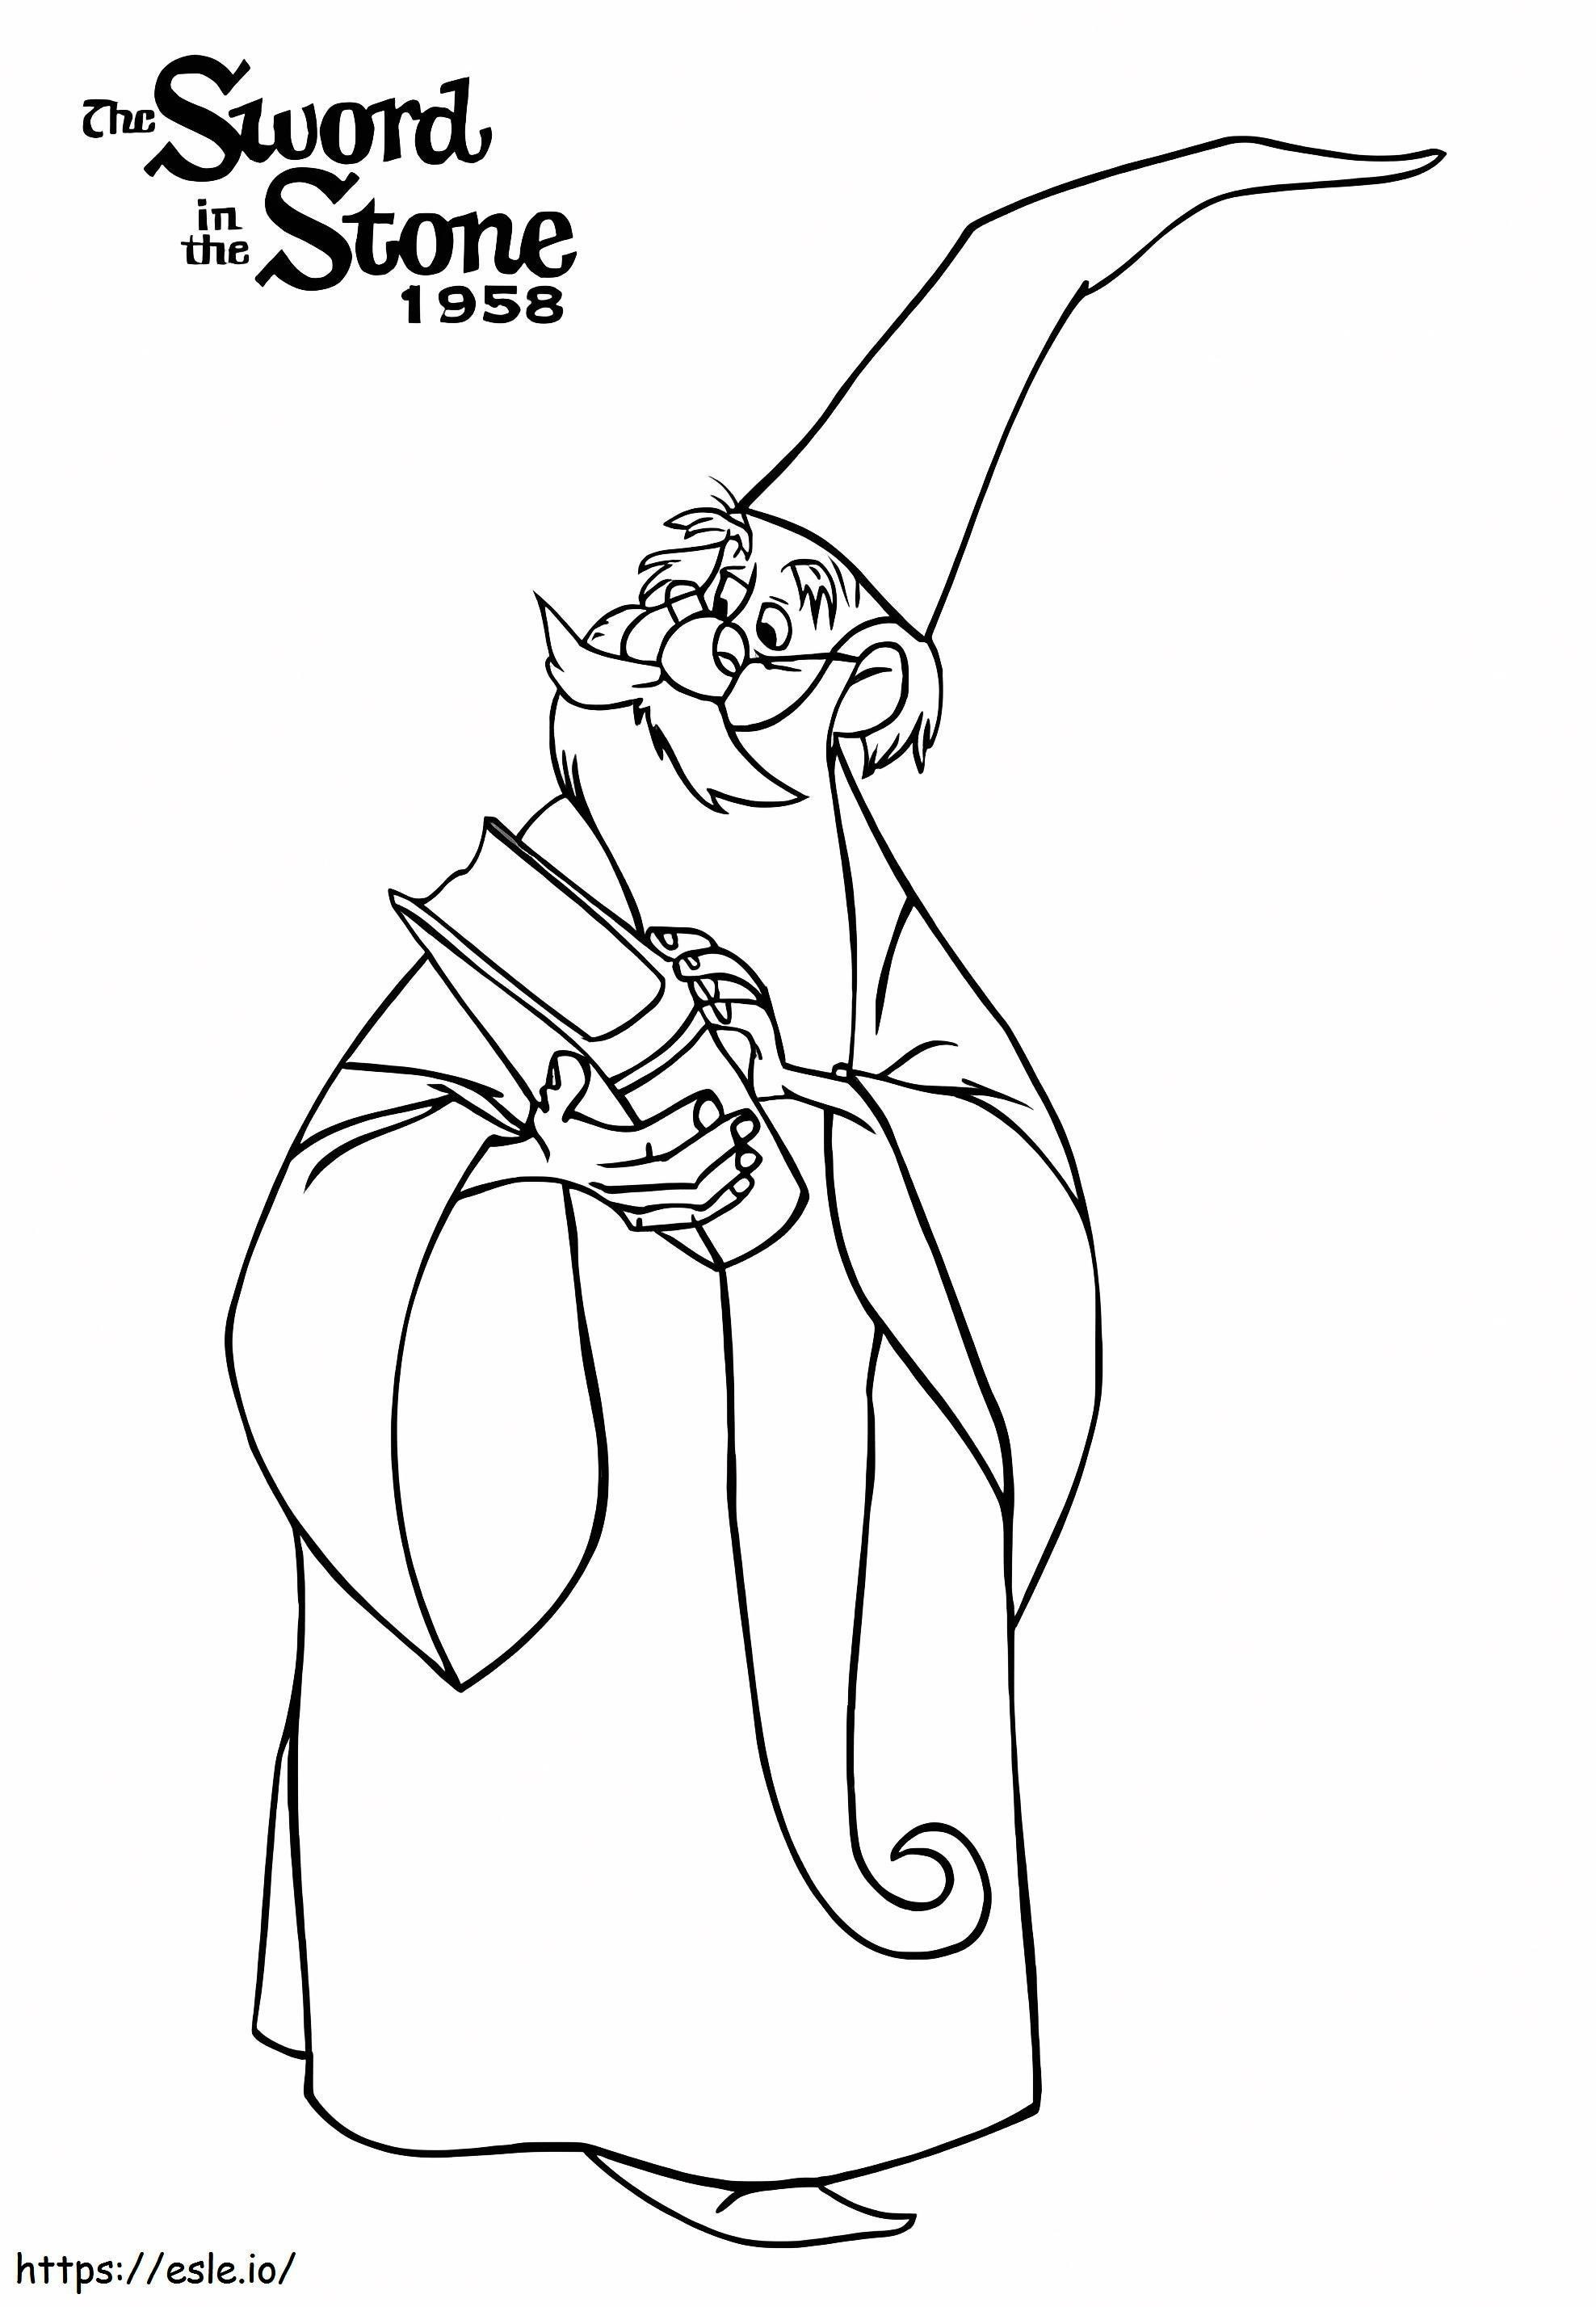 Merlin From The Sword In The Stone coloring page